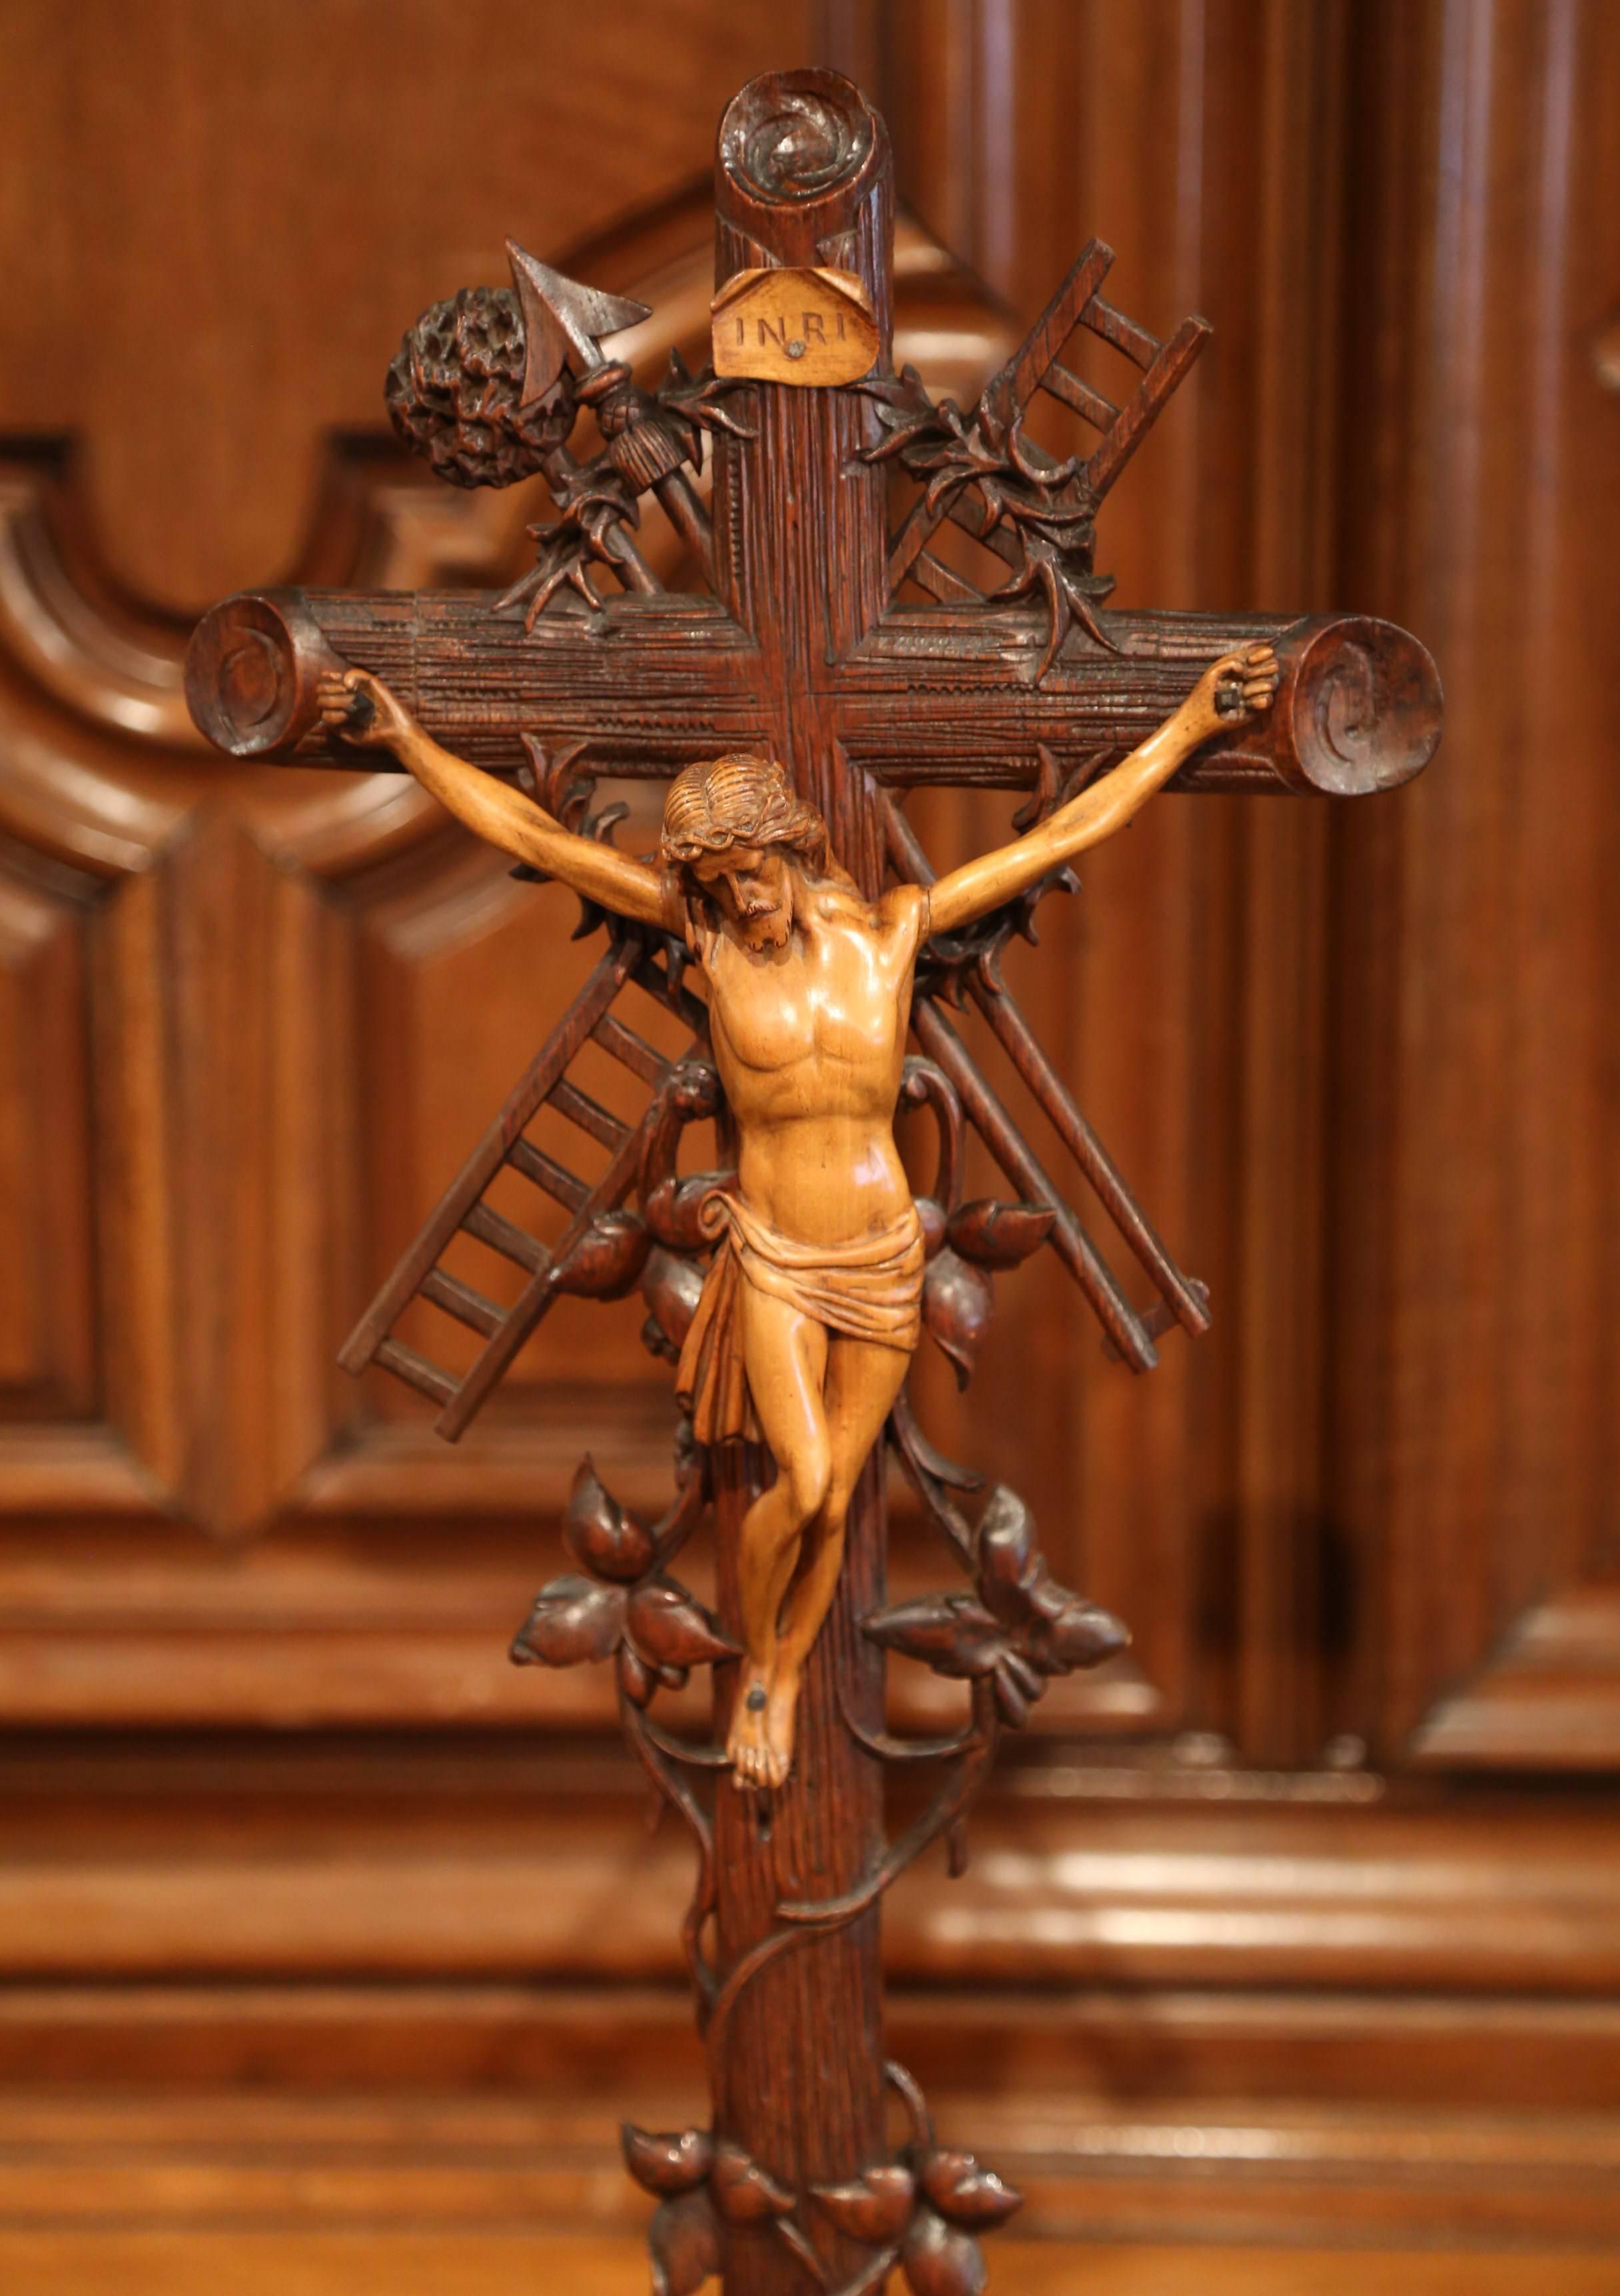 This elegant, antique cross was crafted in France, circa 1850. The intricate crucifix features the Lord nailed on the cross with some of the most interesting attributes related to His crucifixion. The carved motifs include the thorn crown, the